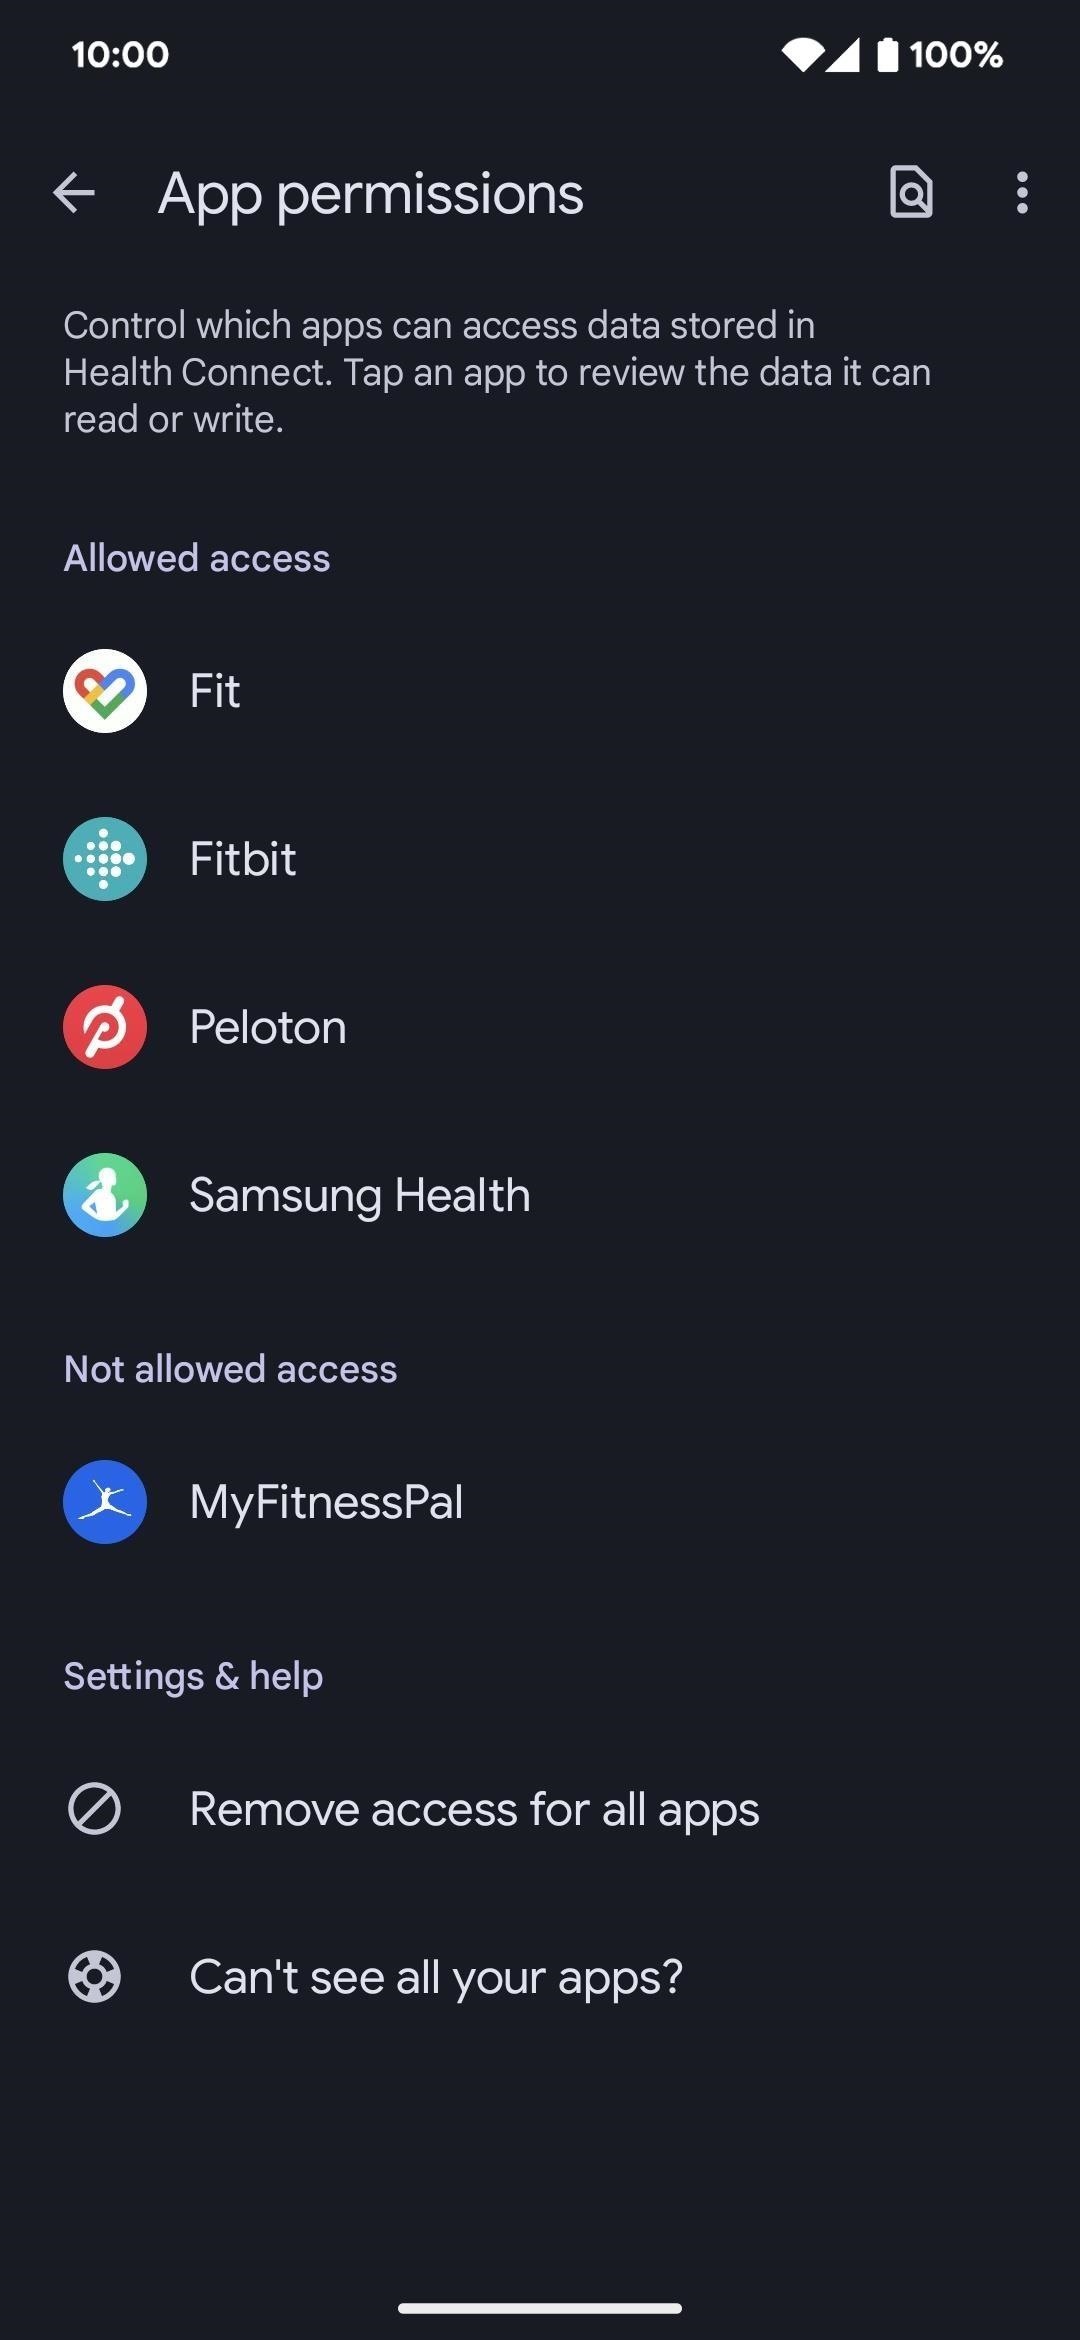 Use Health Connect to Sync Your Health and Fitness Data Between Google Fit, MyFitnessPal, and Other Android Apps